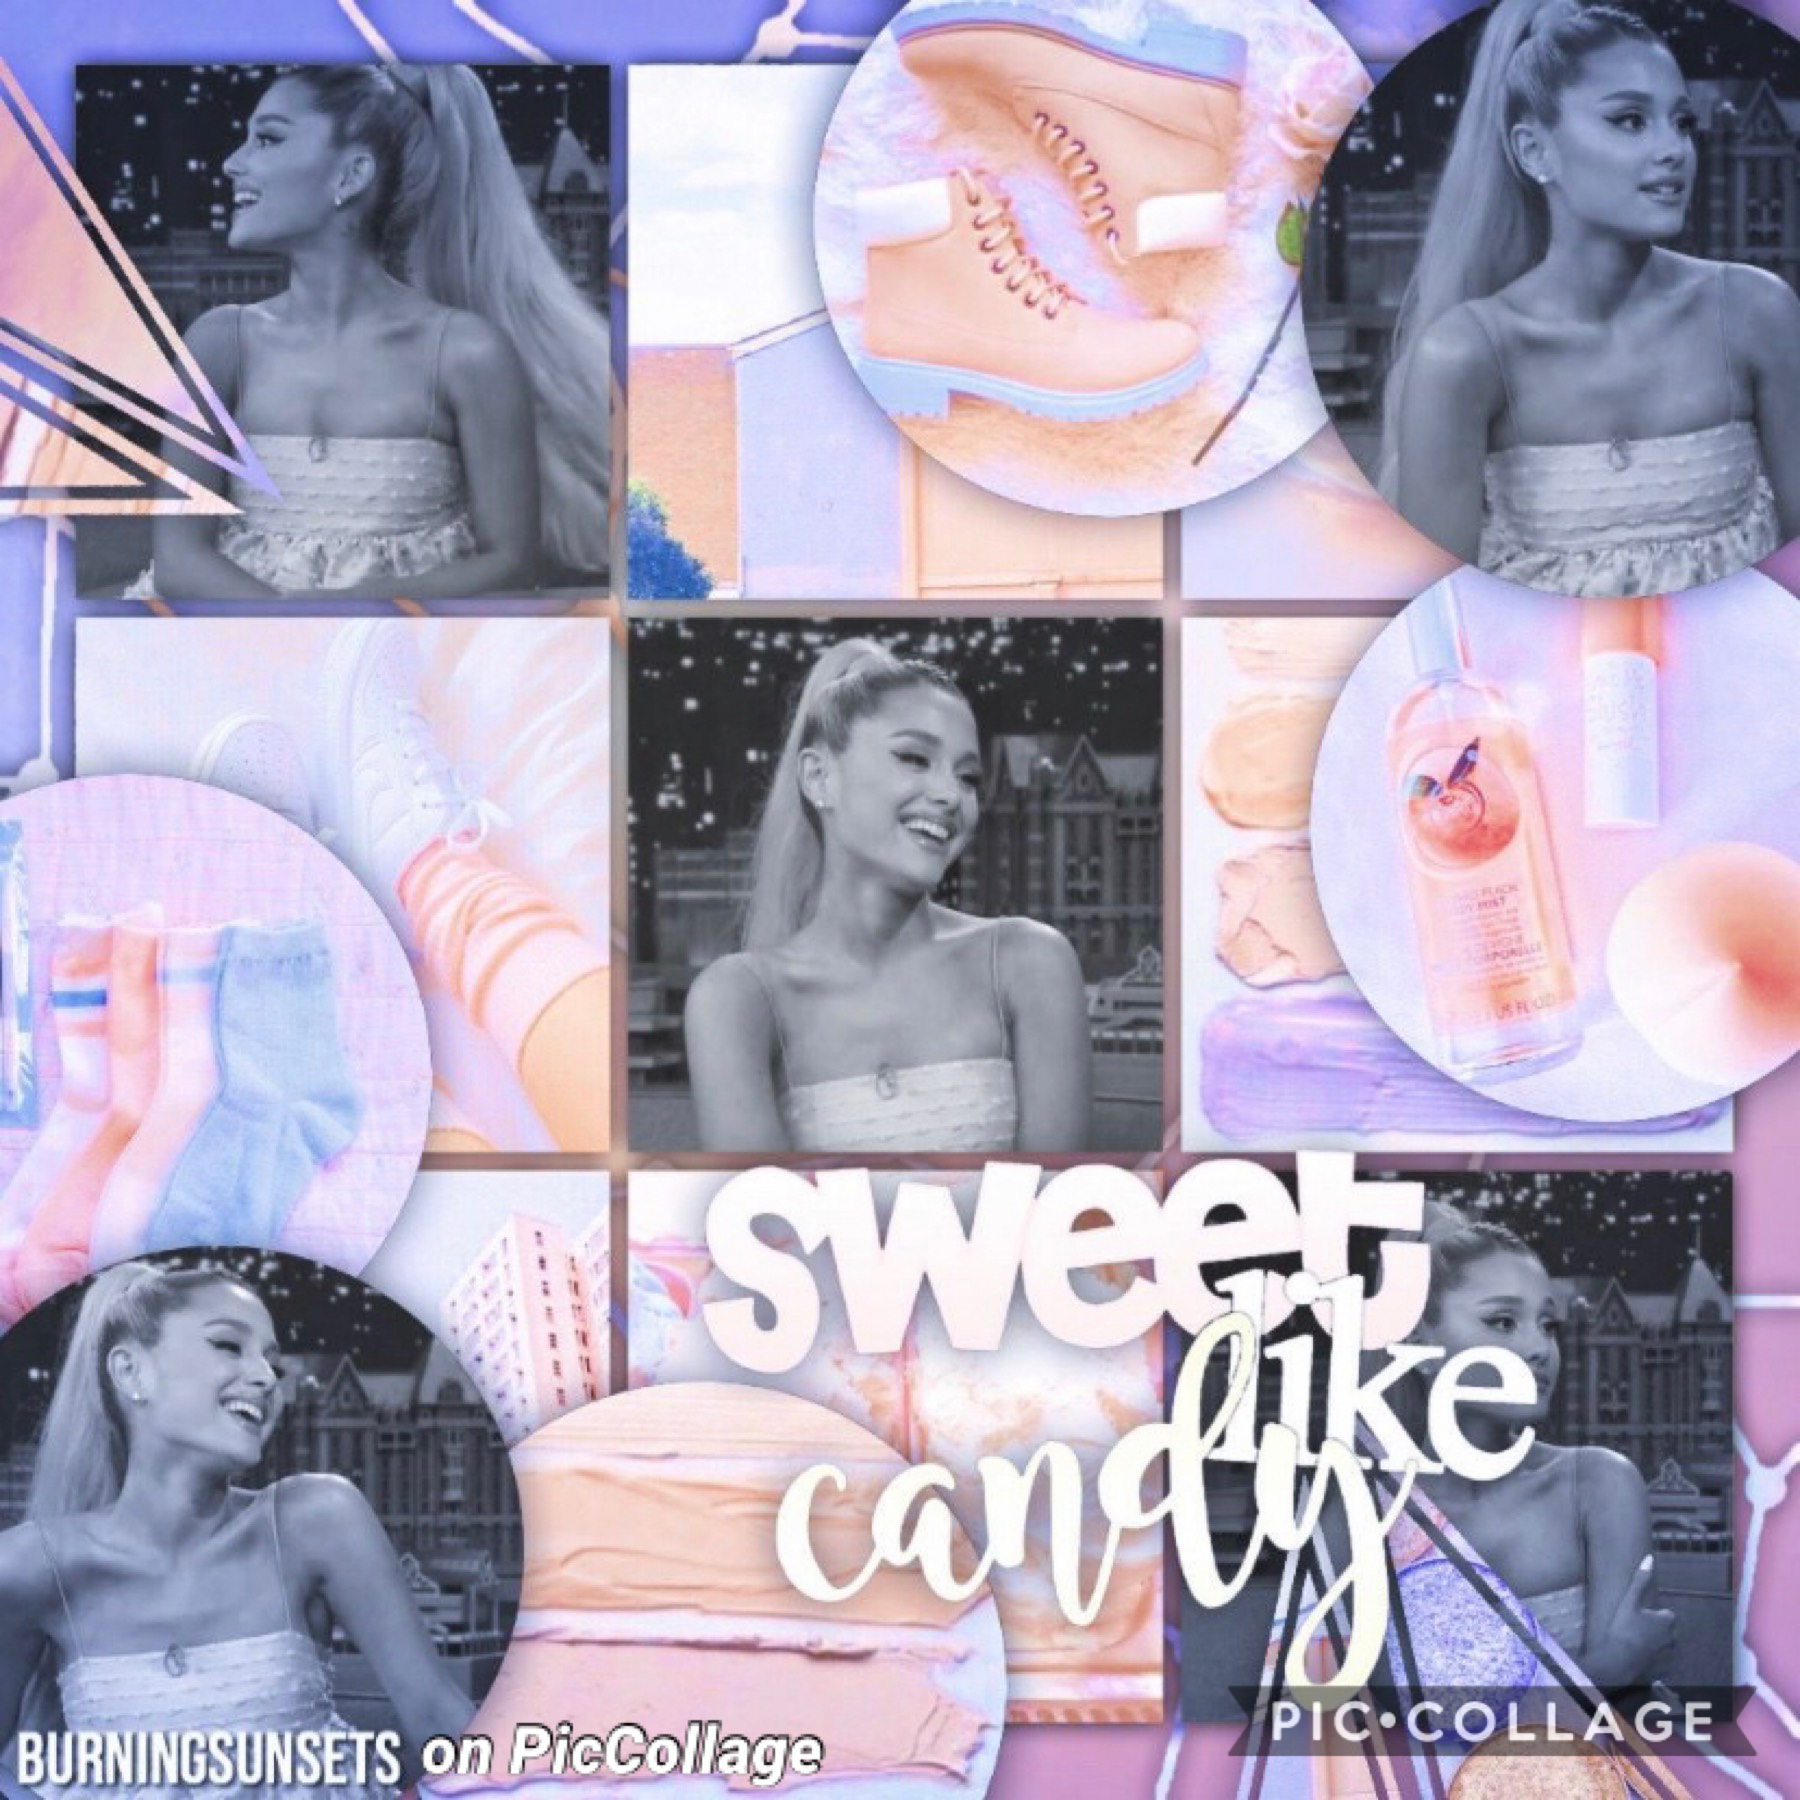 Hi guys 💜 I know I haven’t posted in like forever but here’s an Ariana Grande edit I made in superimpose. Follow my PicsArt because I’m more active on there @burningsunsets 💜